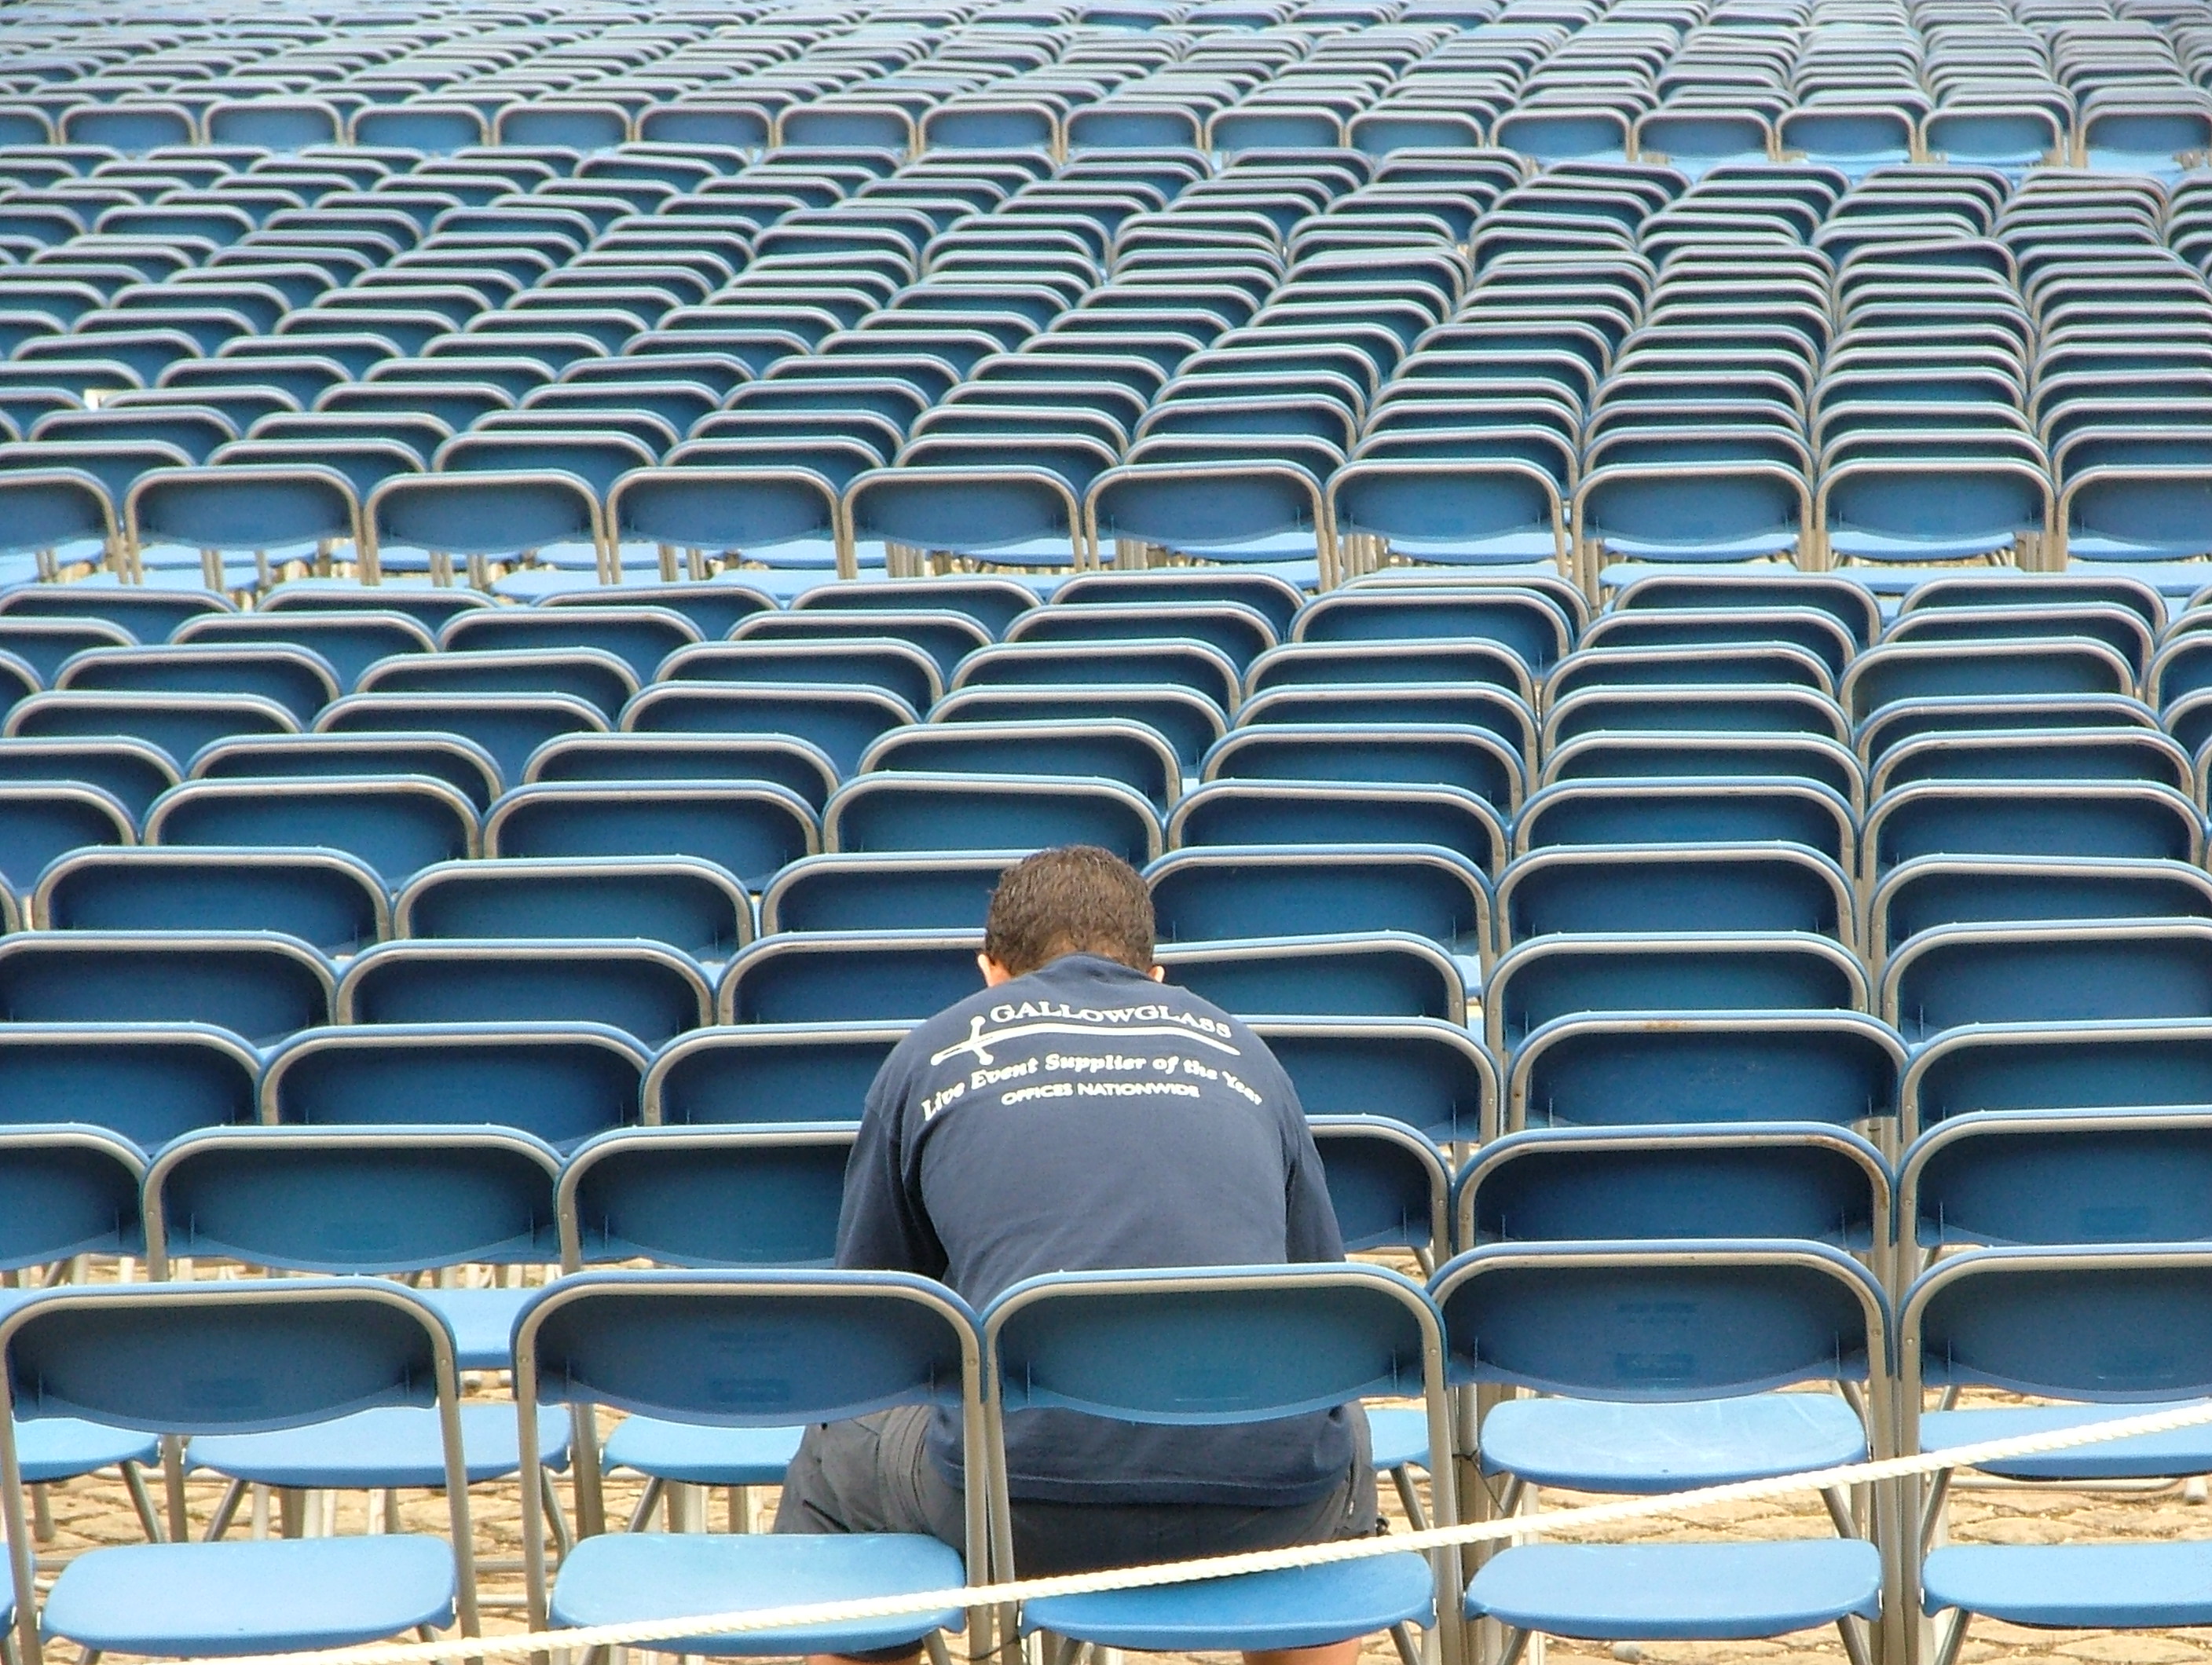 Having a rest, Blue, Chairs, Patterns, People, HQ Photo